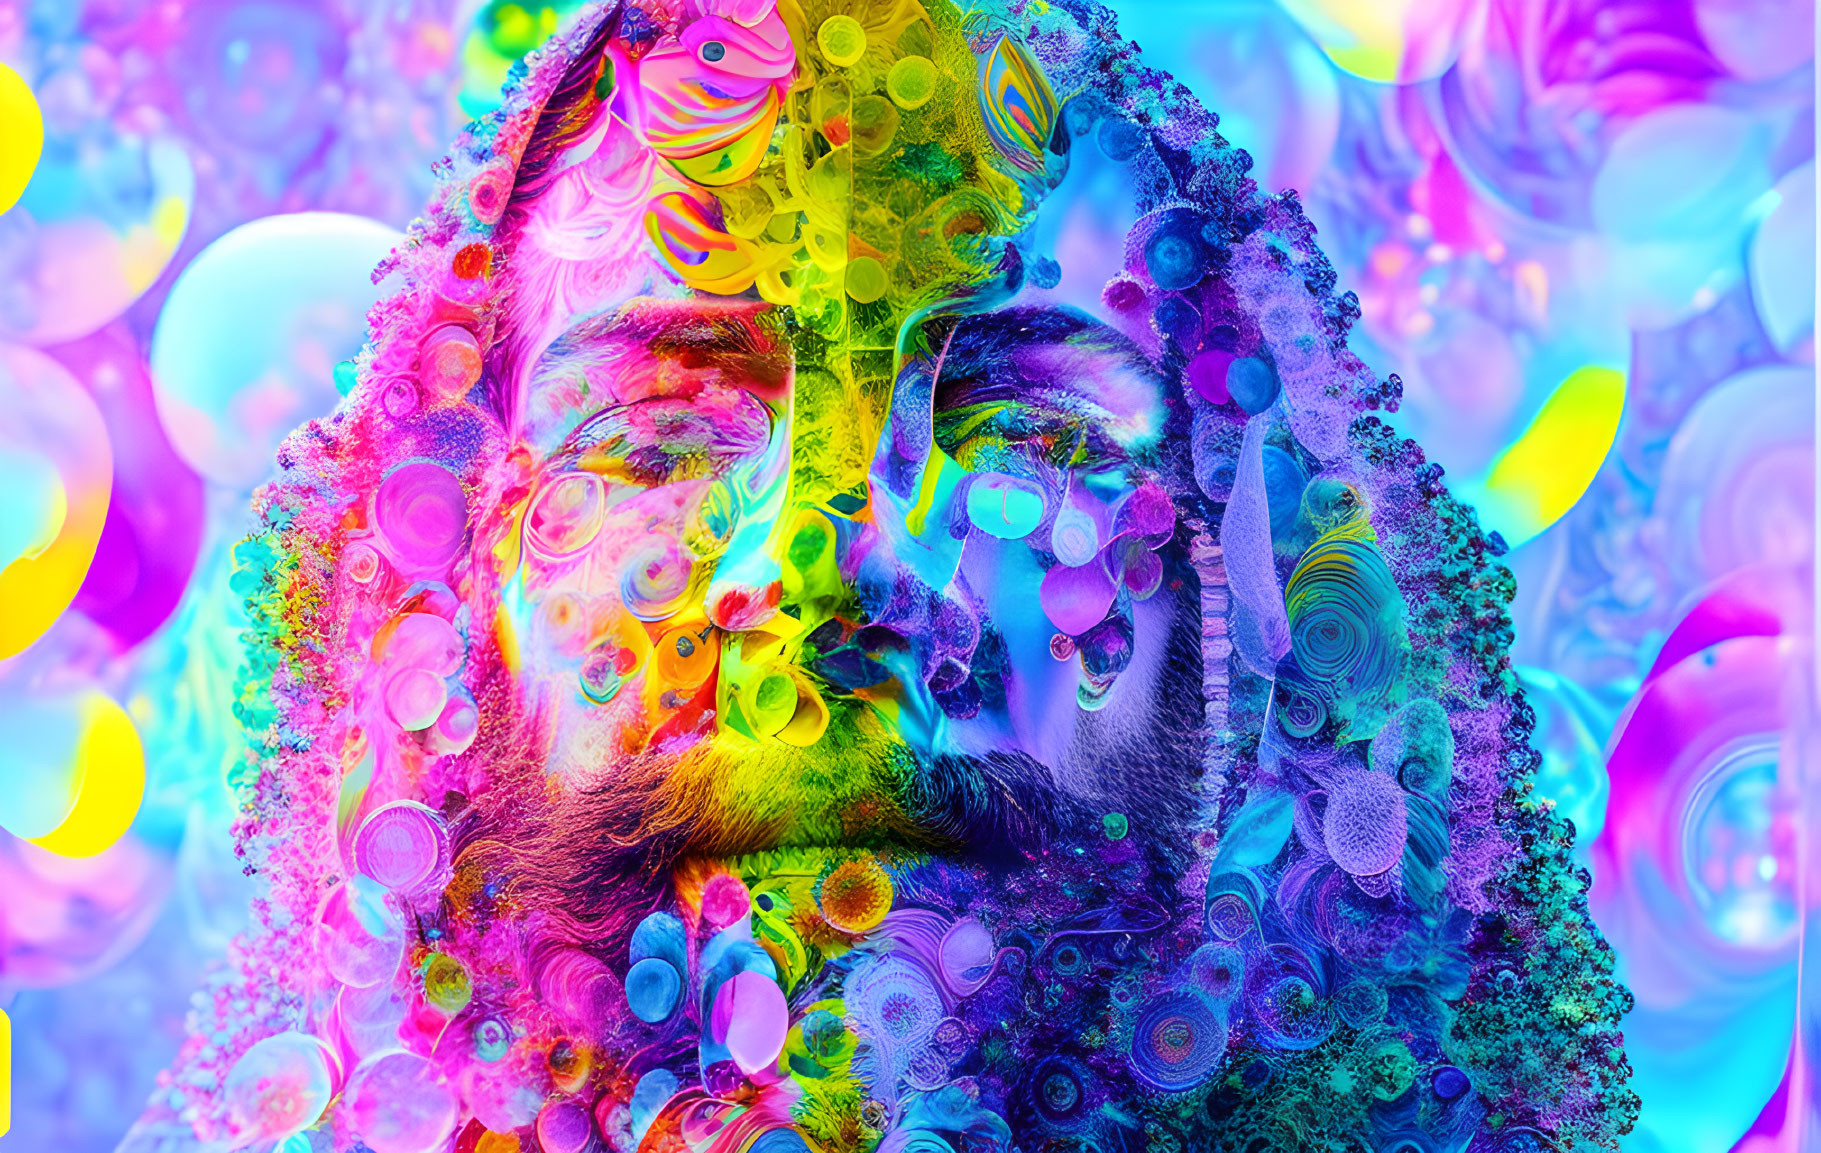 Colorful Psychedelic Fractal Patterns Merge with Human Face